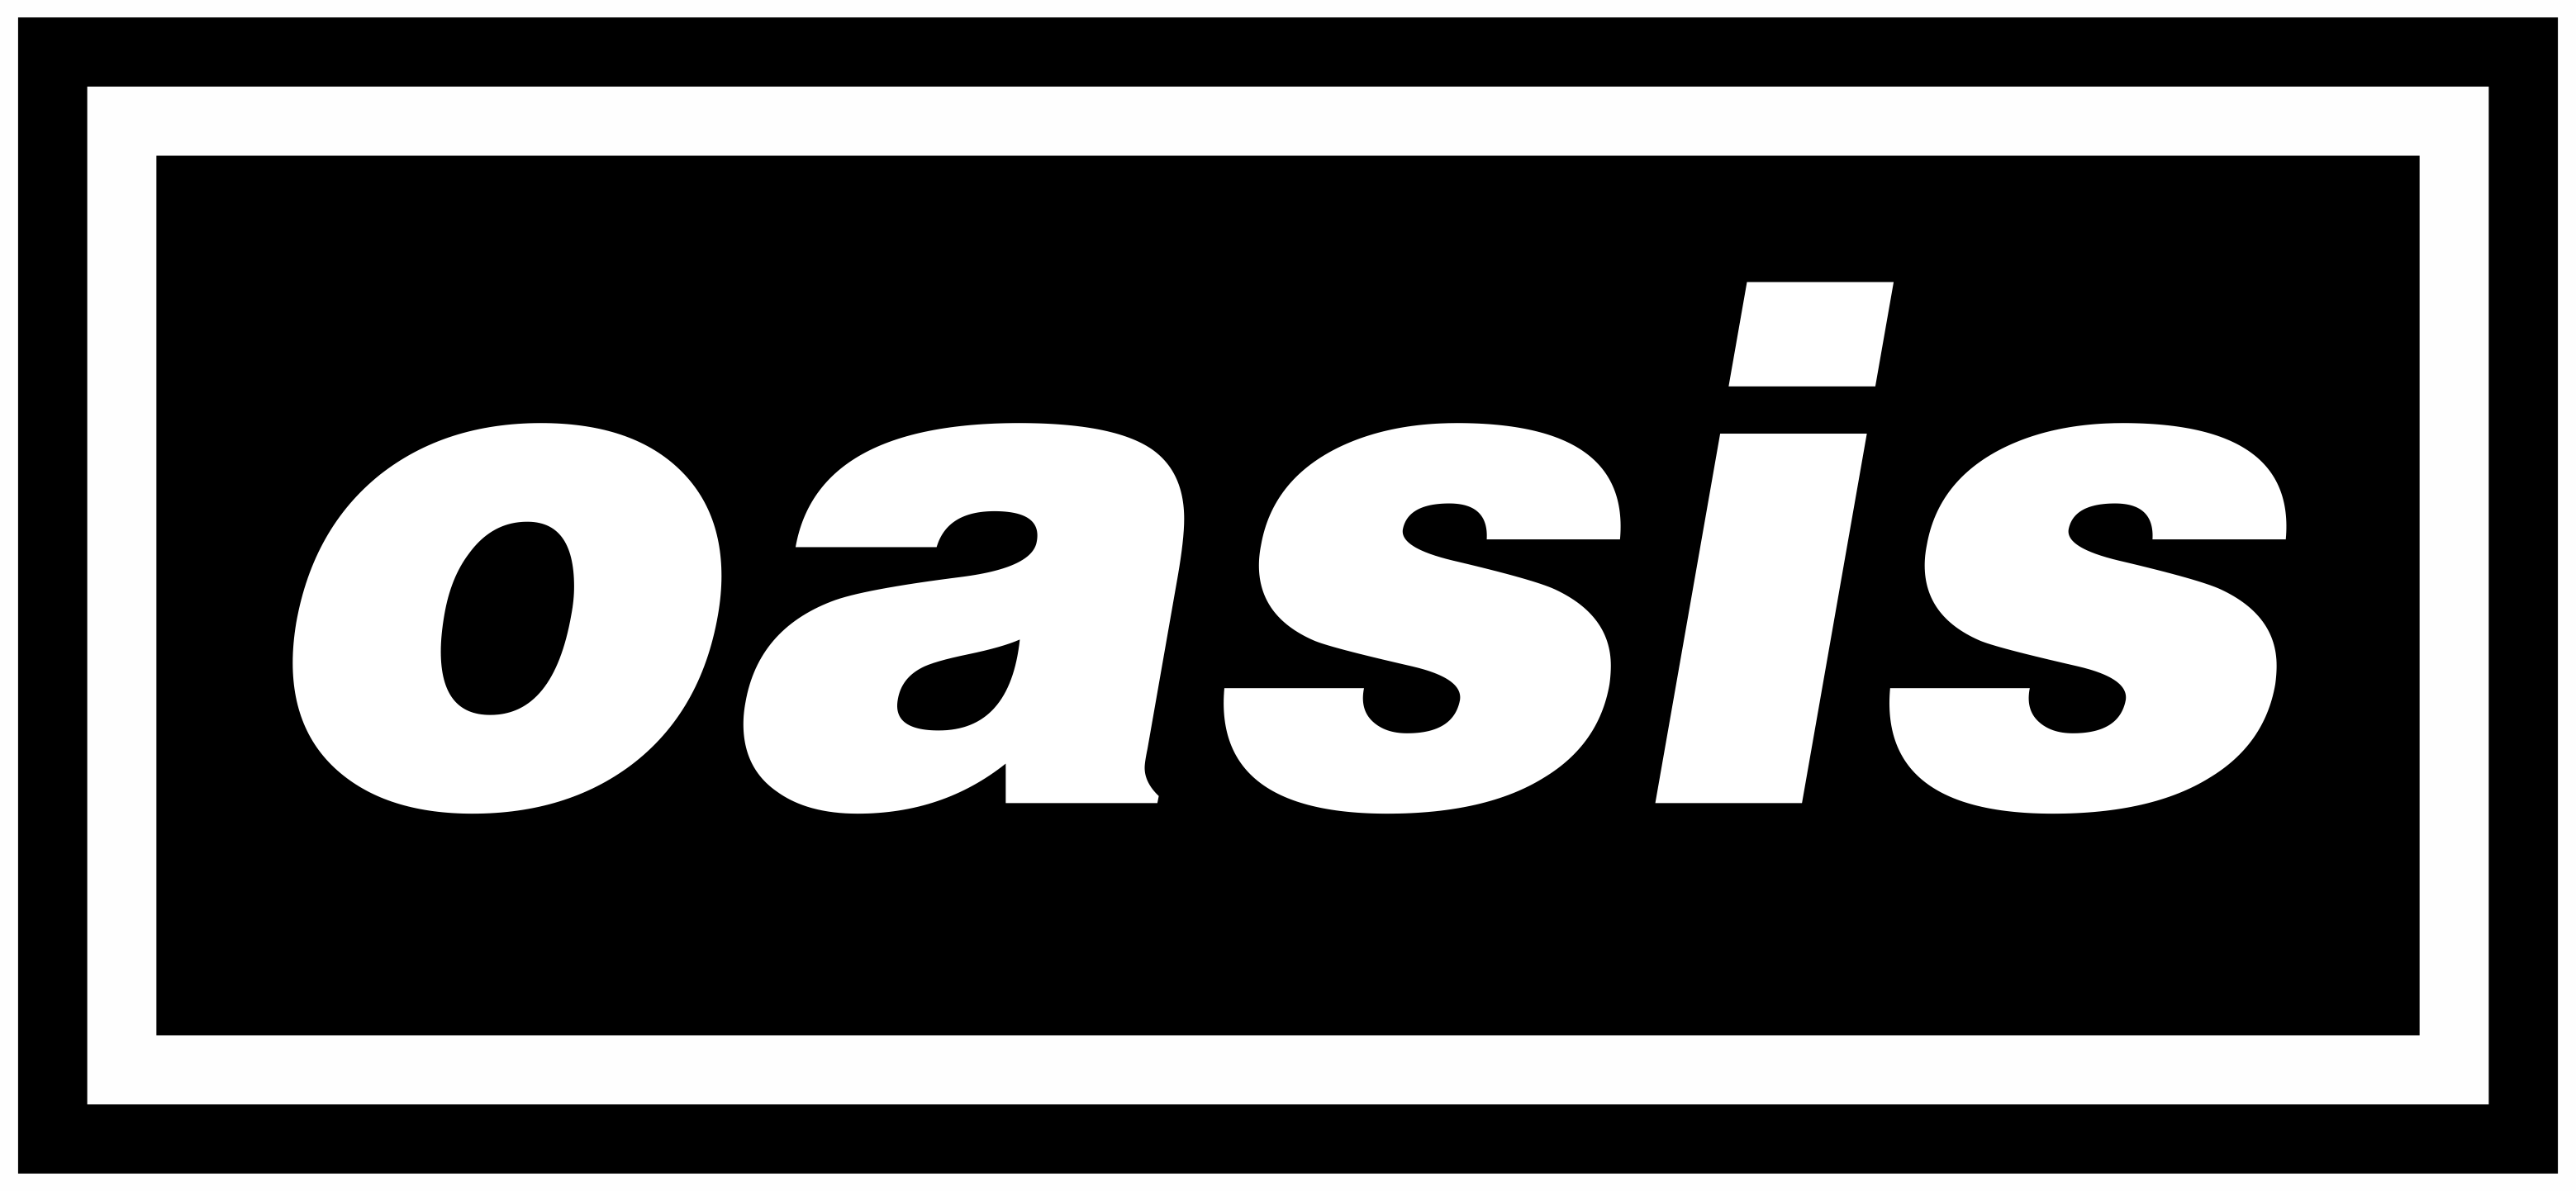 Oasis Logo - Anyone else really love the simplicity of the original Oasis logo ...